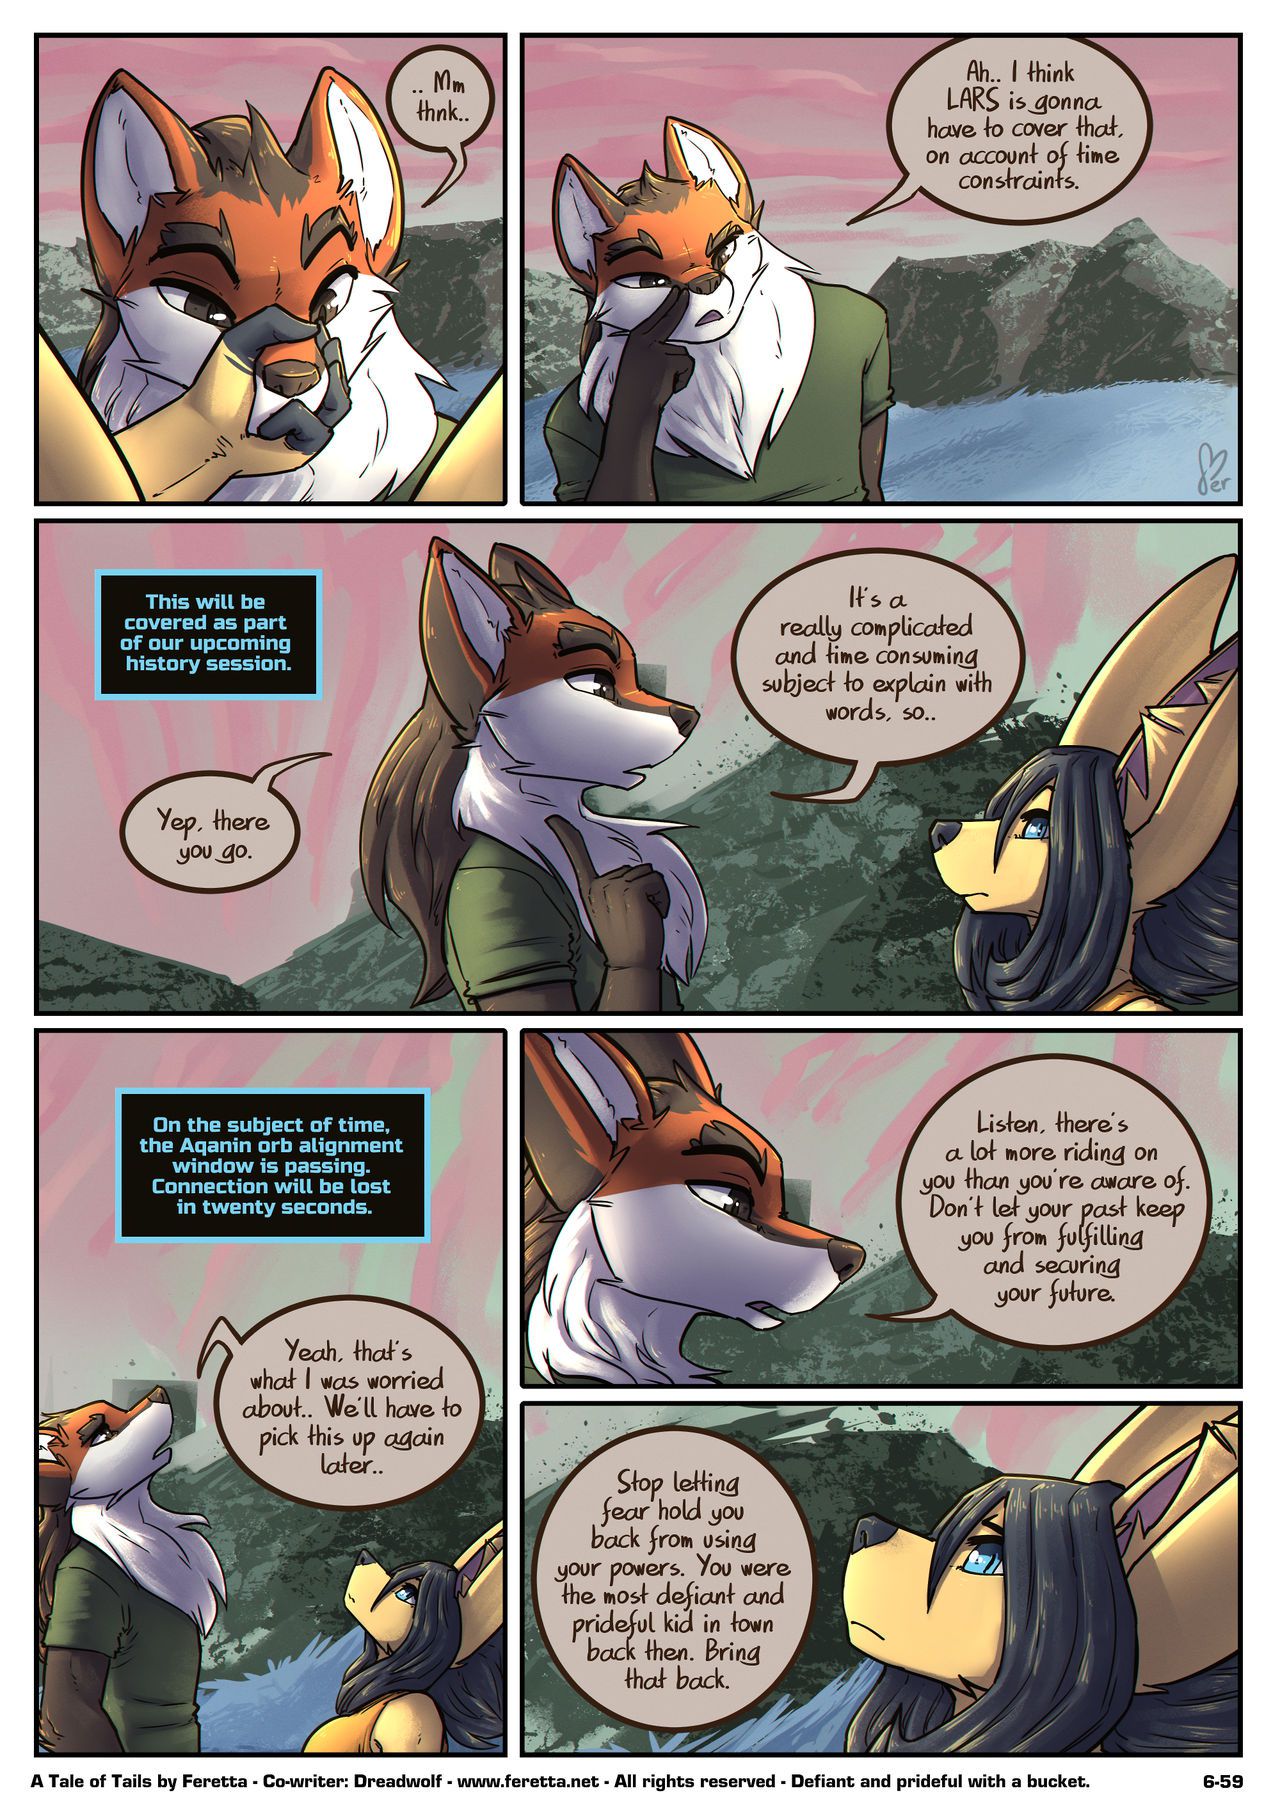 [Feretta] Farellian Legends: A Tale of Tails (w/Extras) [Ongoing] 354